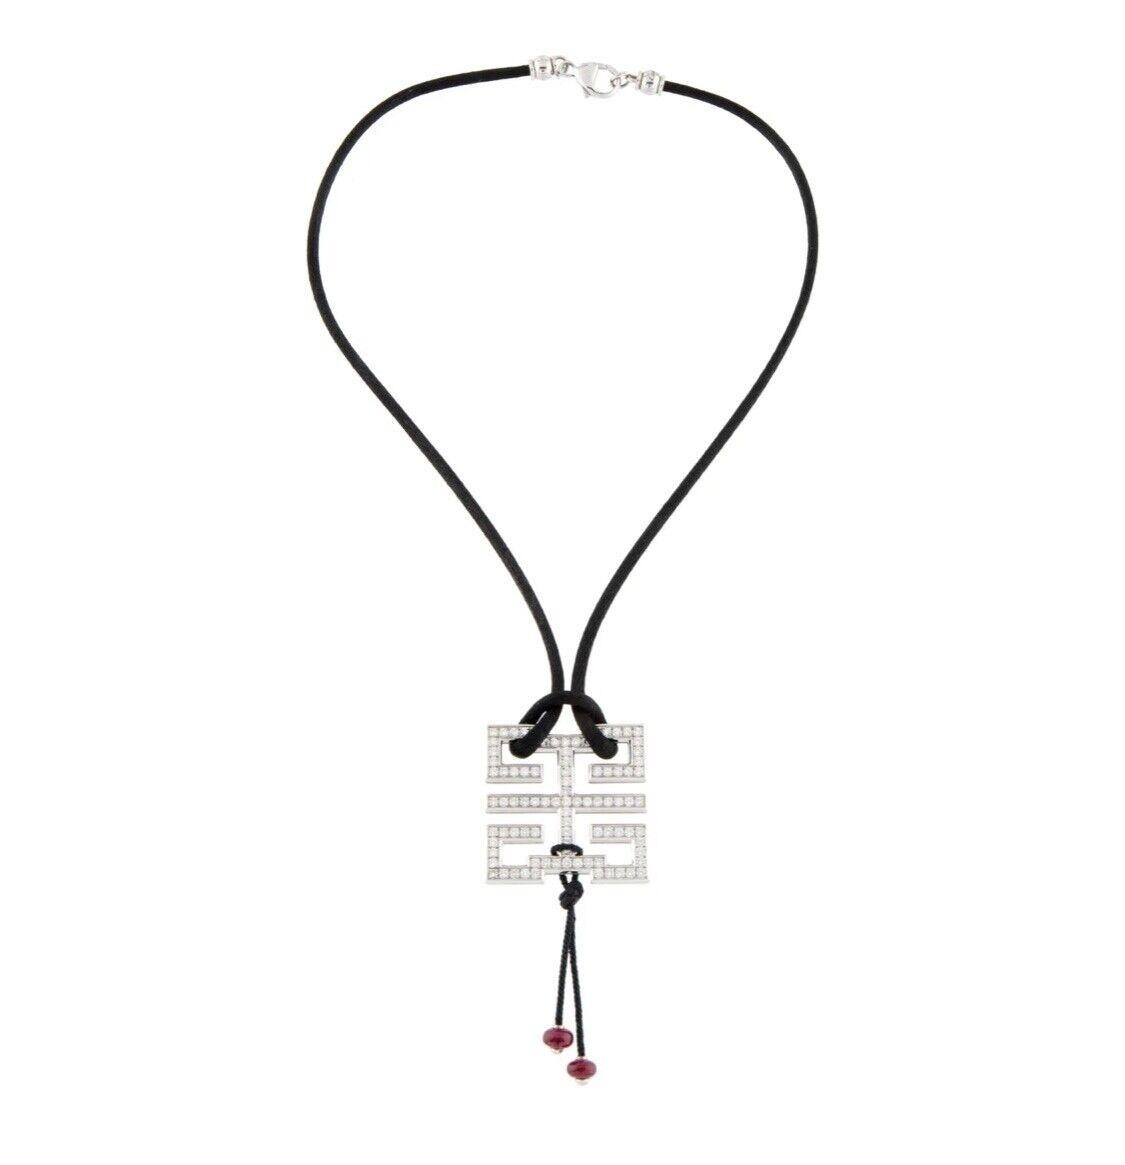 CARTIER Le Baiser du Dragon Pendant Necklace.


Metal Type: 18K White Gold

Marks: 750, Designer Signature, Registered Trademark Number, Serial Number

Metal Finish: High Polish, Rhodium-Plated

Total Item Weight (g): 18.5

Clasp Style: Lobster